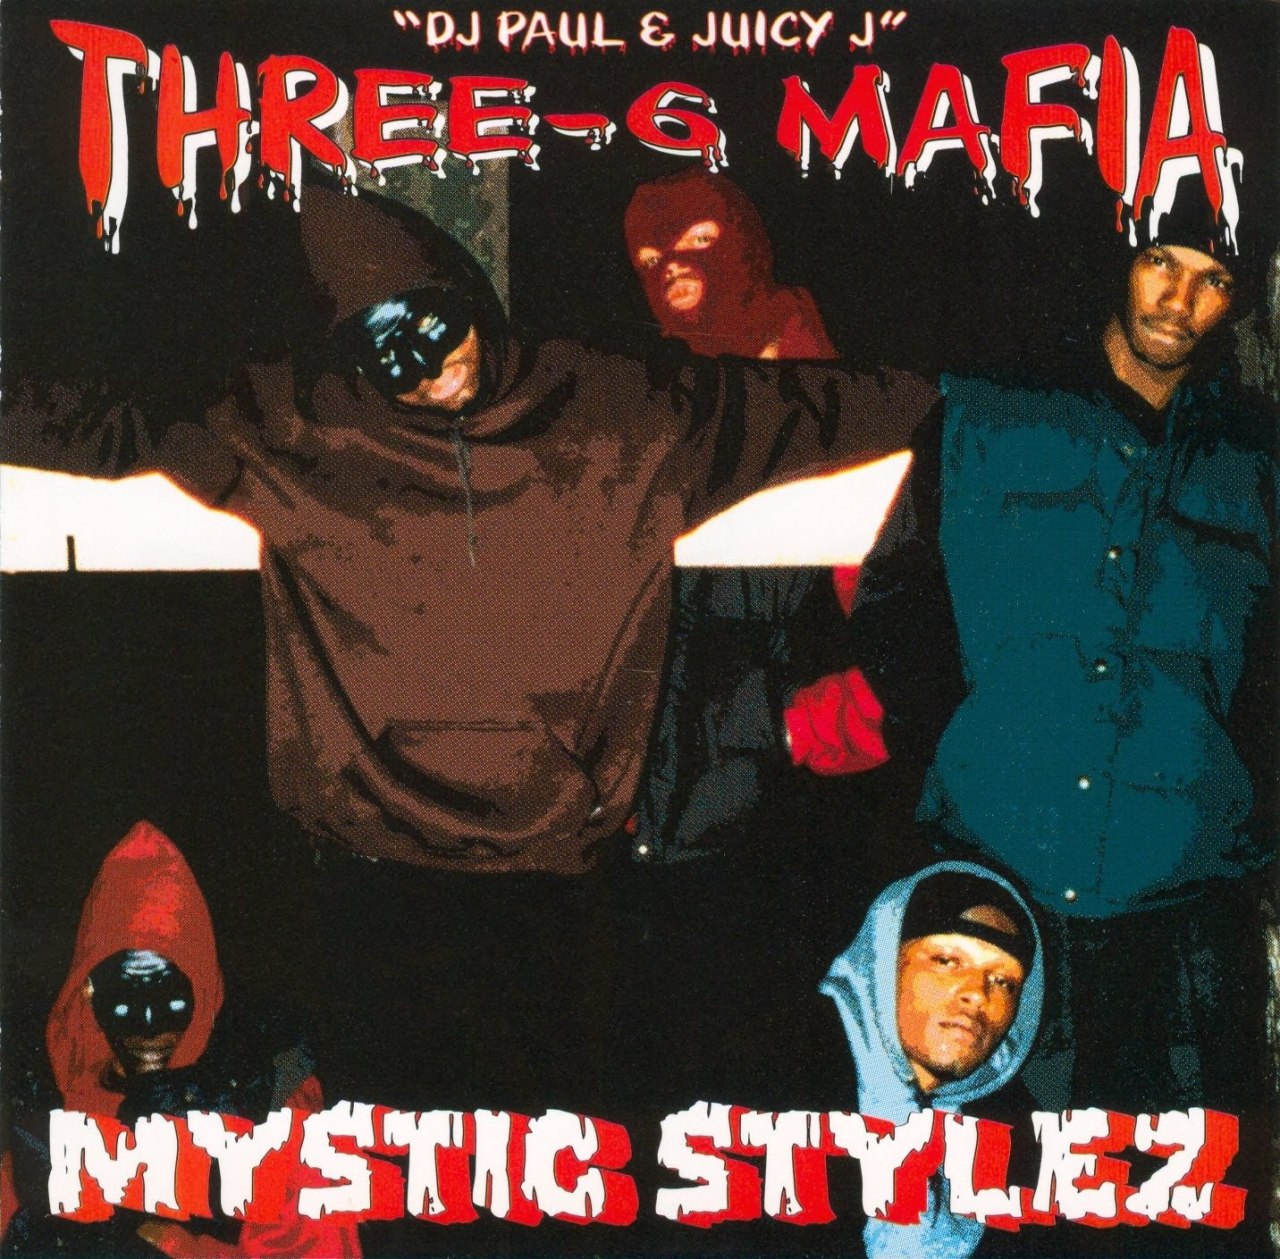 BACK IN THE DAY |5/25/95| Three Six Mafia released their debut album, Mystic Stylez,